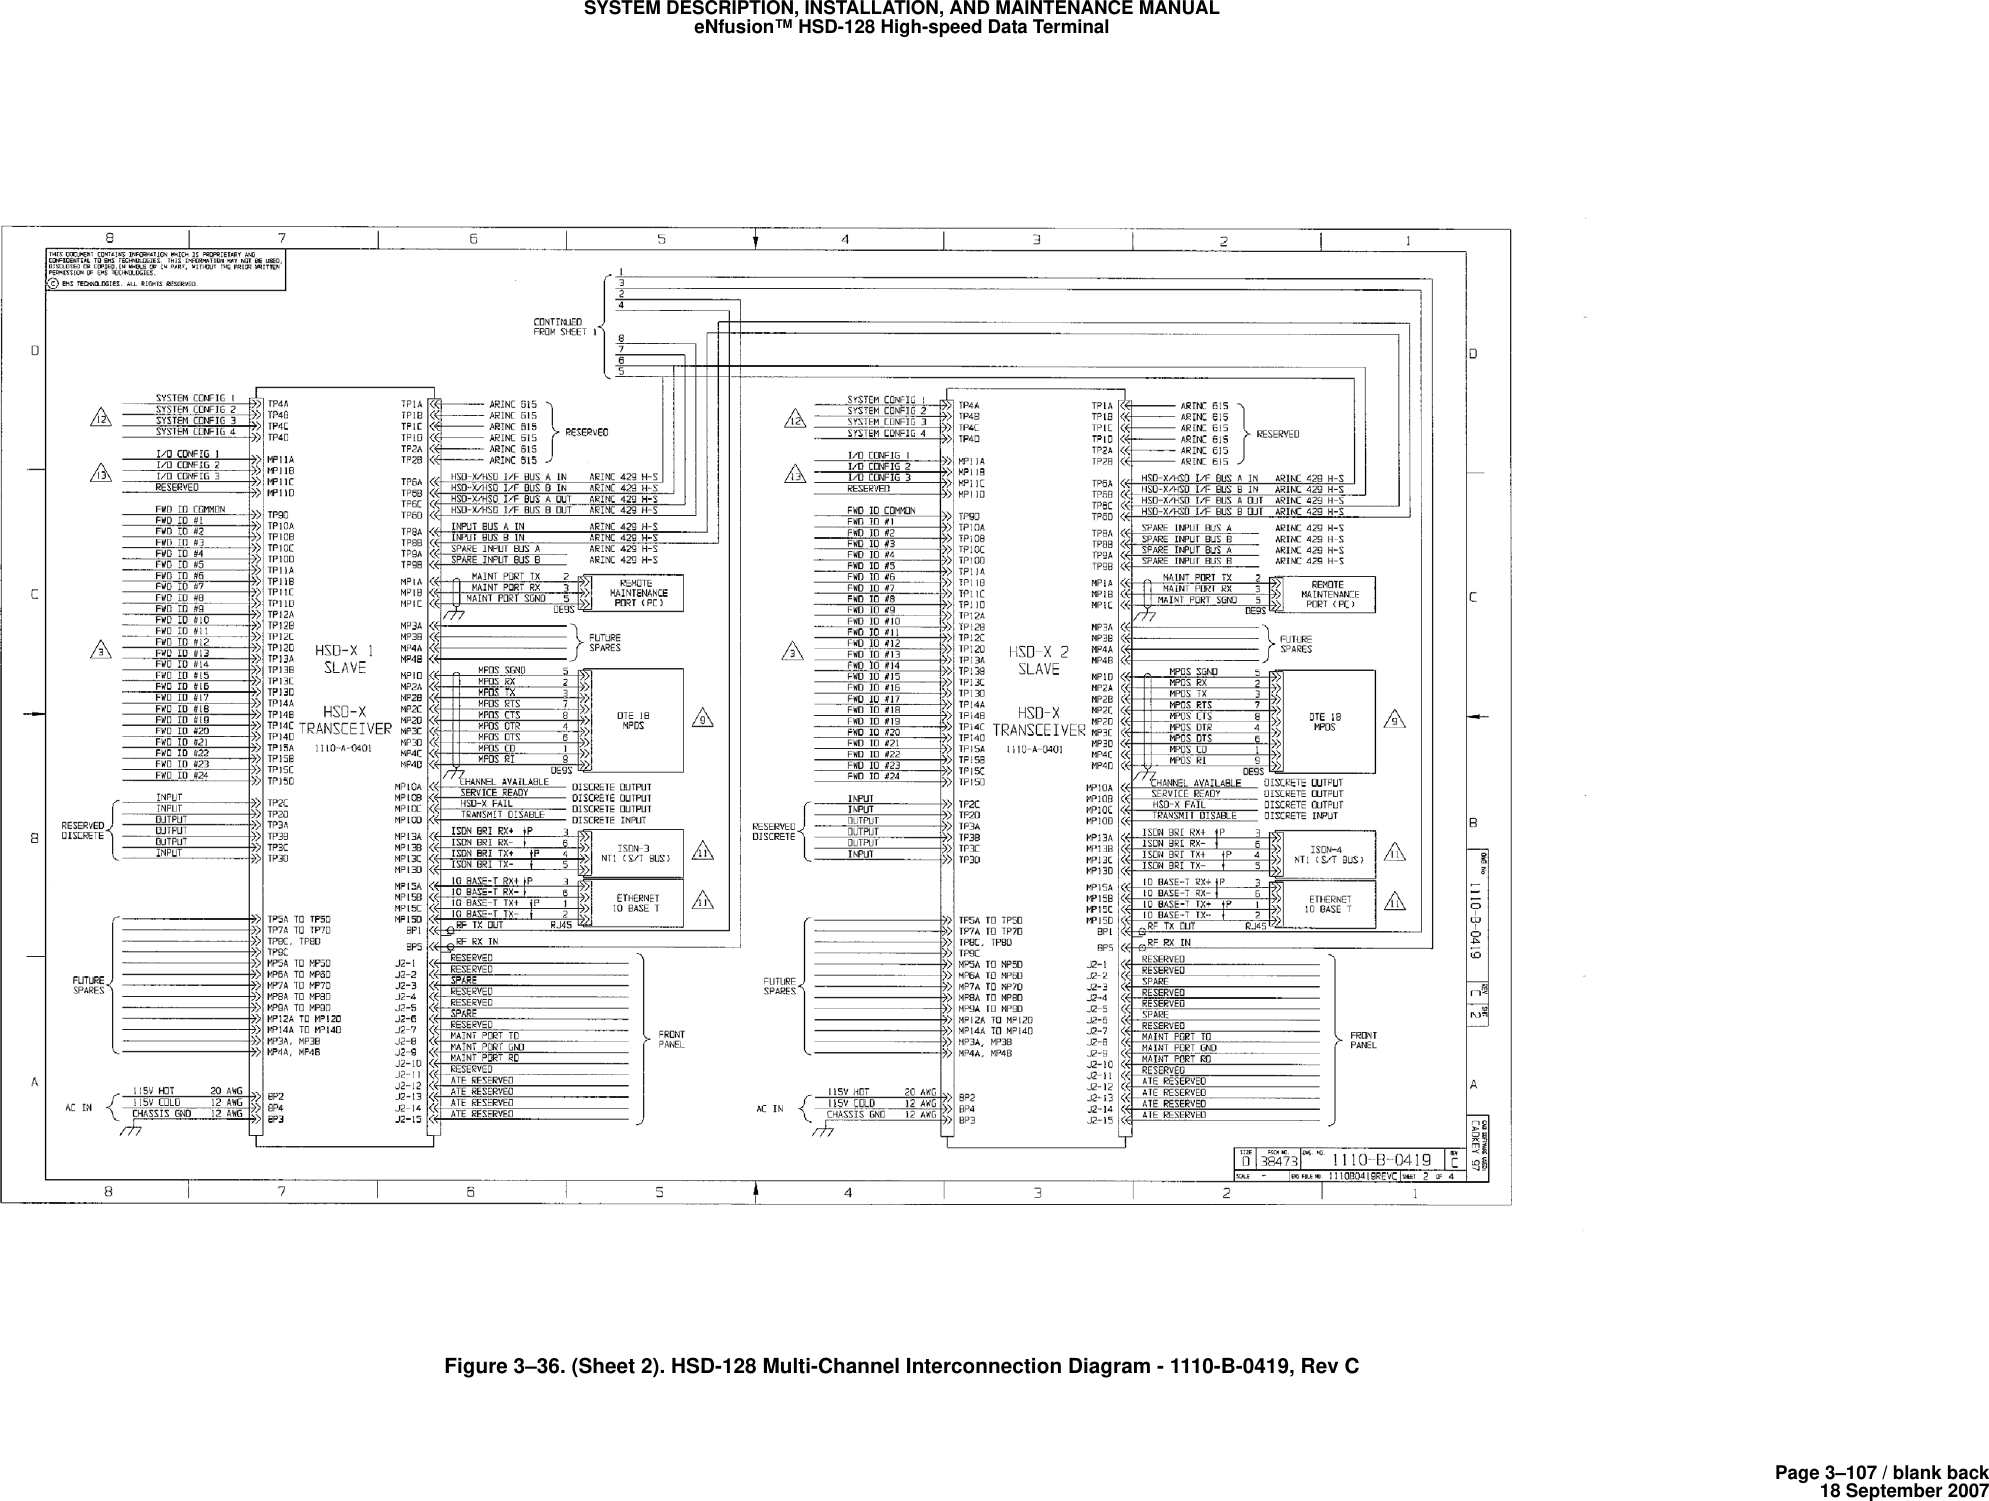 Page 3–107 / blank back18 September 2007SYSTEM DESCRIPTION, INSTALLATION, AND MAINTENANCE MANUALeNfusion™ HSD-128 High-speed Data TerminalFigure 3–36. (Sheet 2). HSD-128 Multi-Channel Interconnection Diagram - 1110-B-0419, Rev C